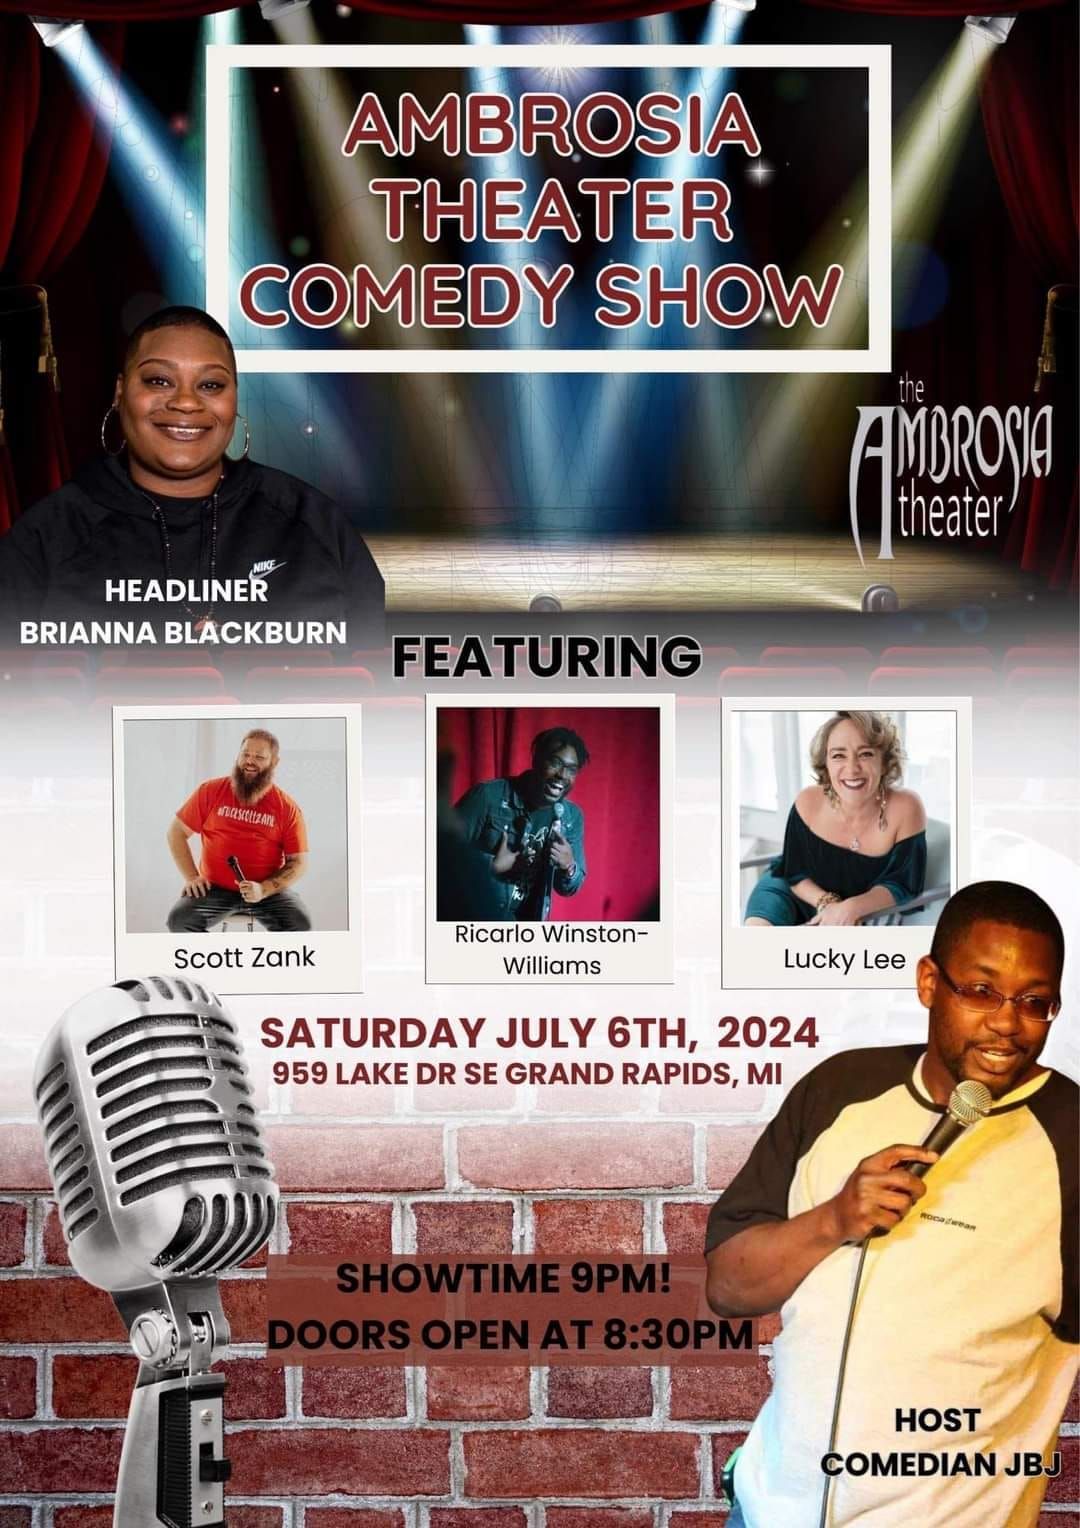 Ambrosia Theater Comedy Night - One Show Only 8:30pm - 10:30pm